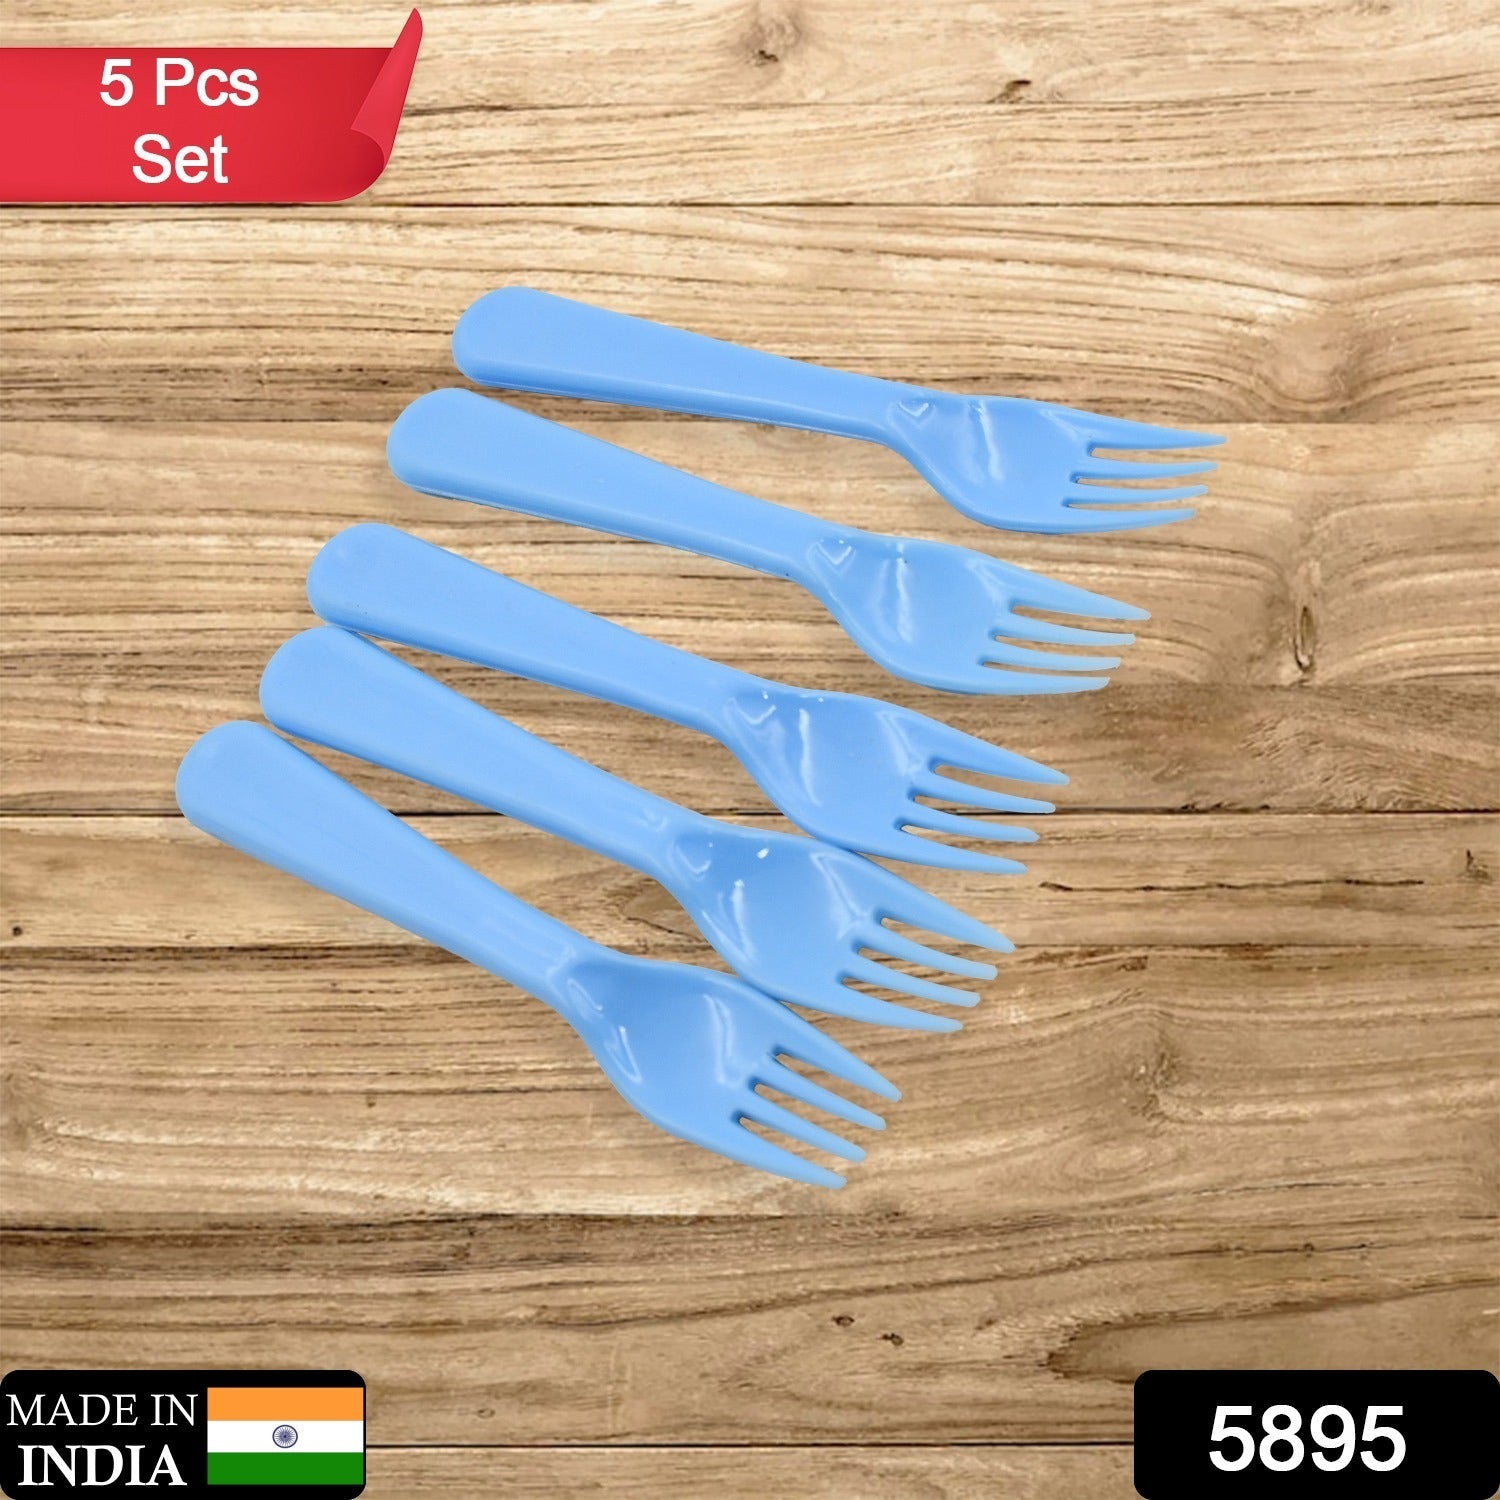 5895  Reusable Premium Heavy Weight Plastic Forks, Party Supplies, One Size, plastic 5pc Serving Fork Set for kitchen, Travel, Home (5pc)